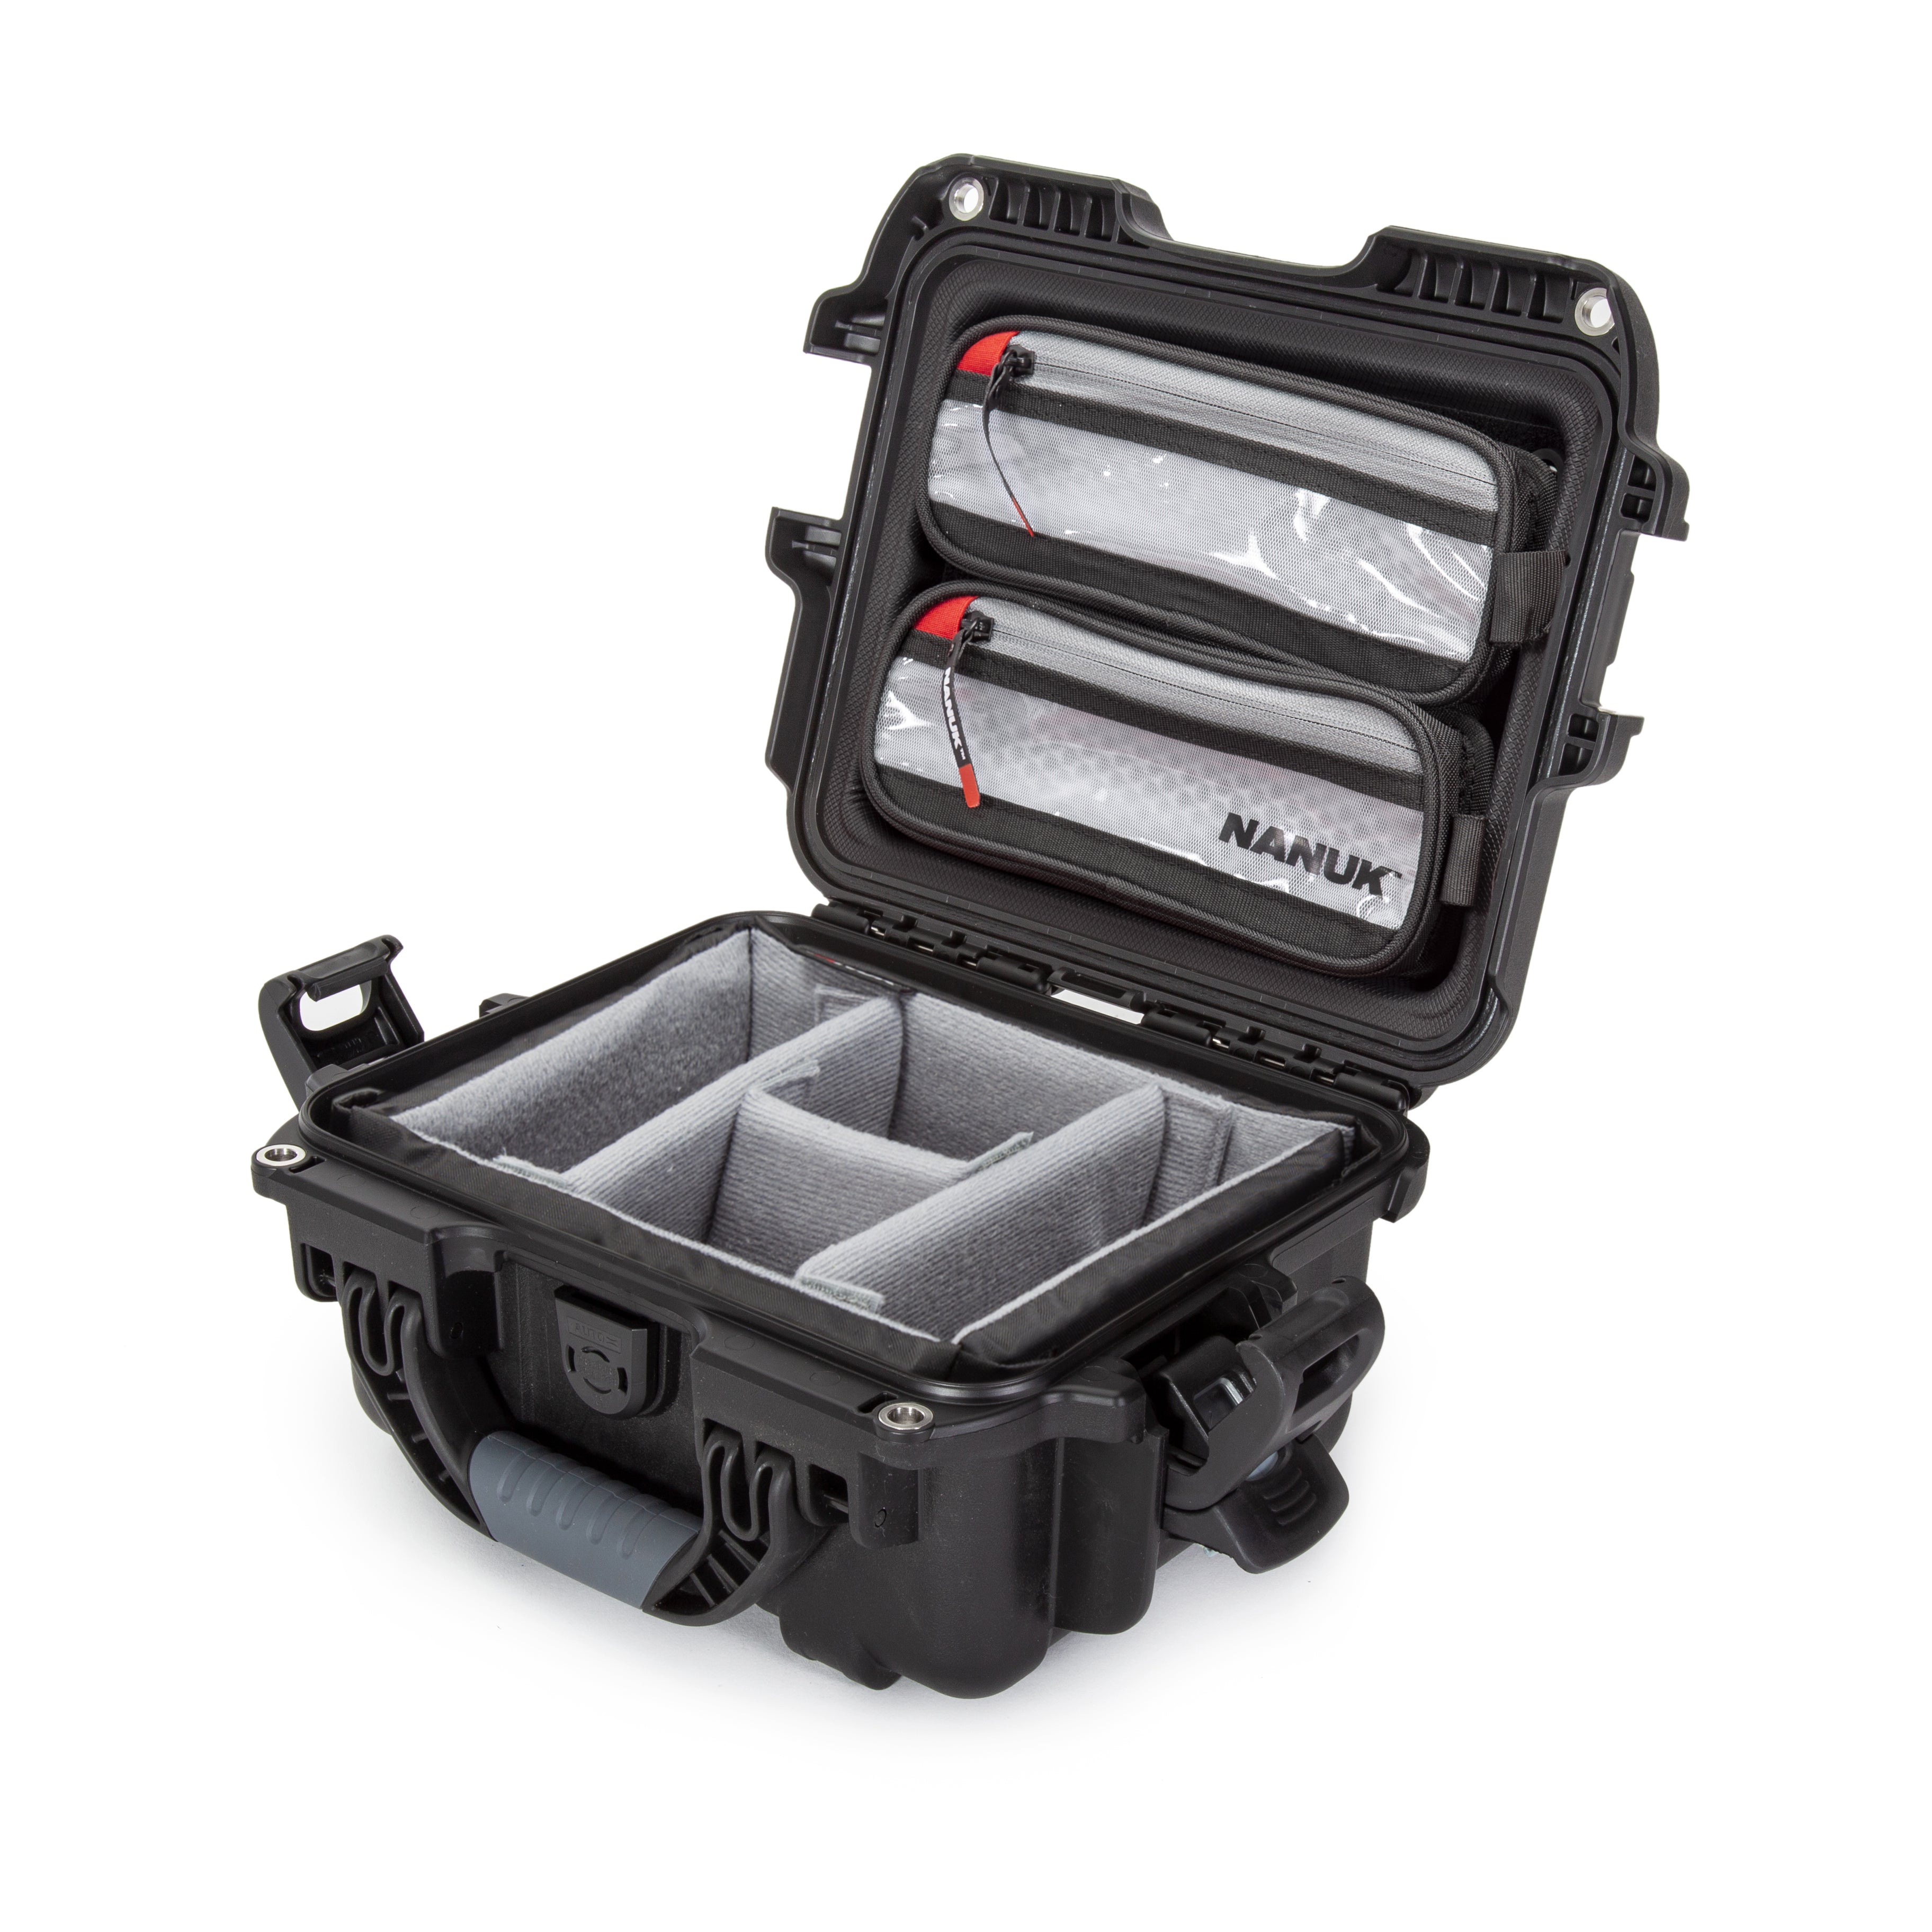 Nanuk 905 with Padded divider and Lid-Organizer